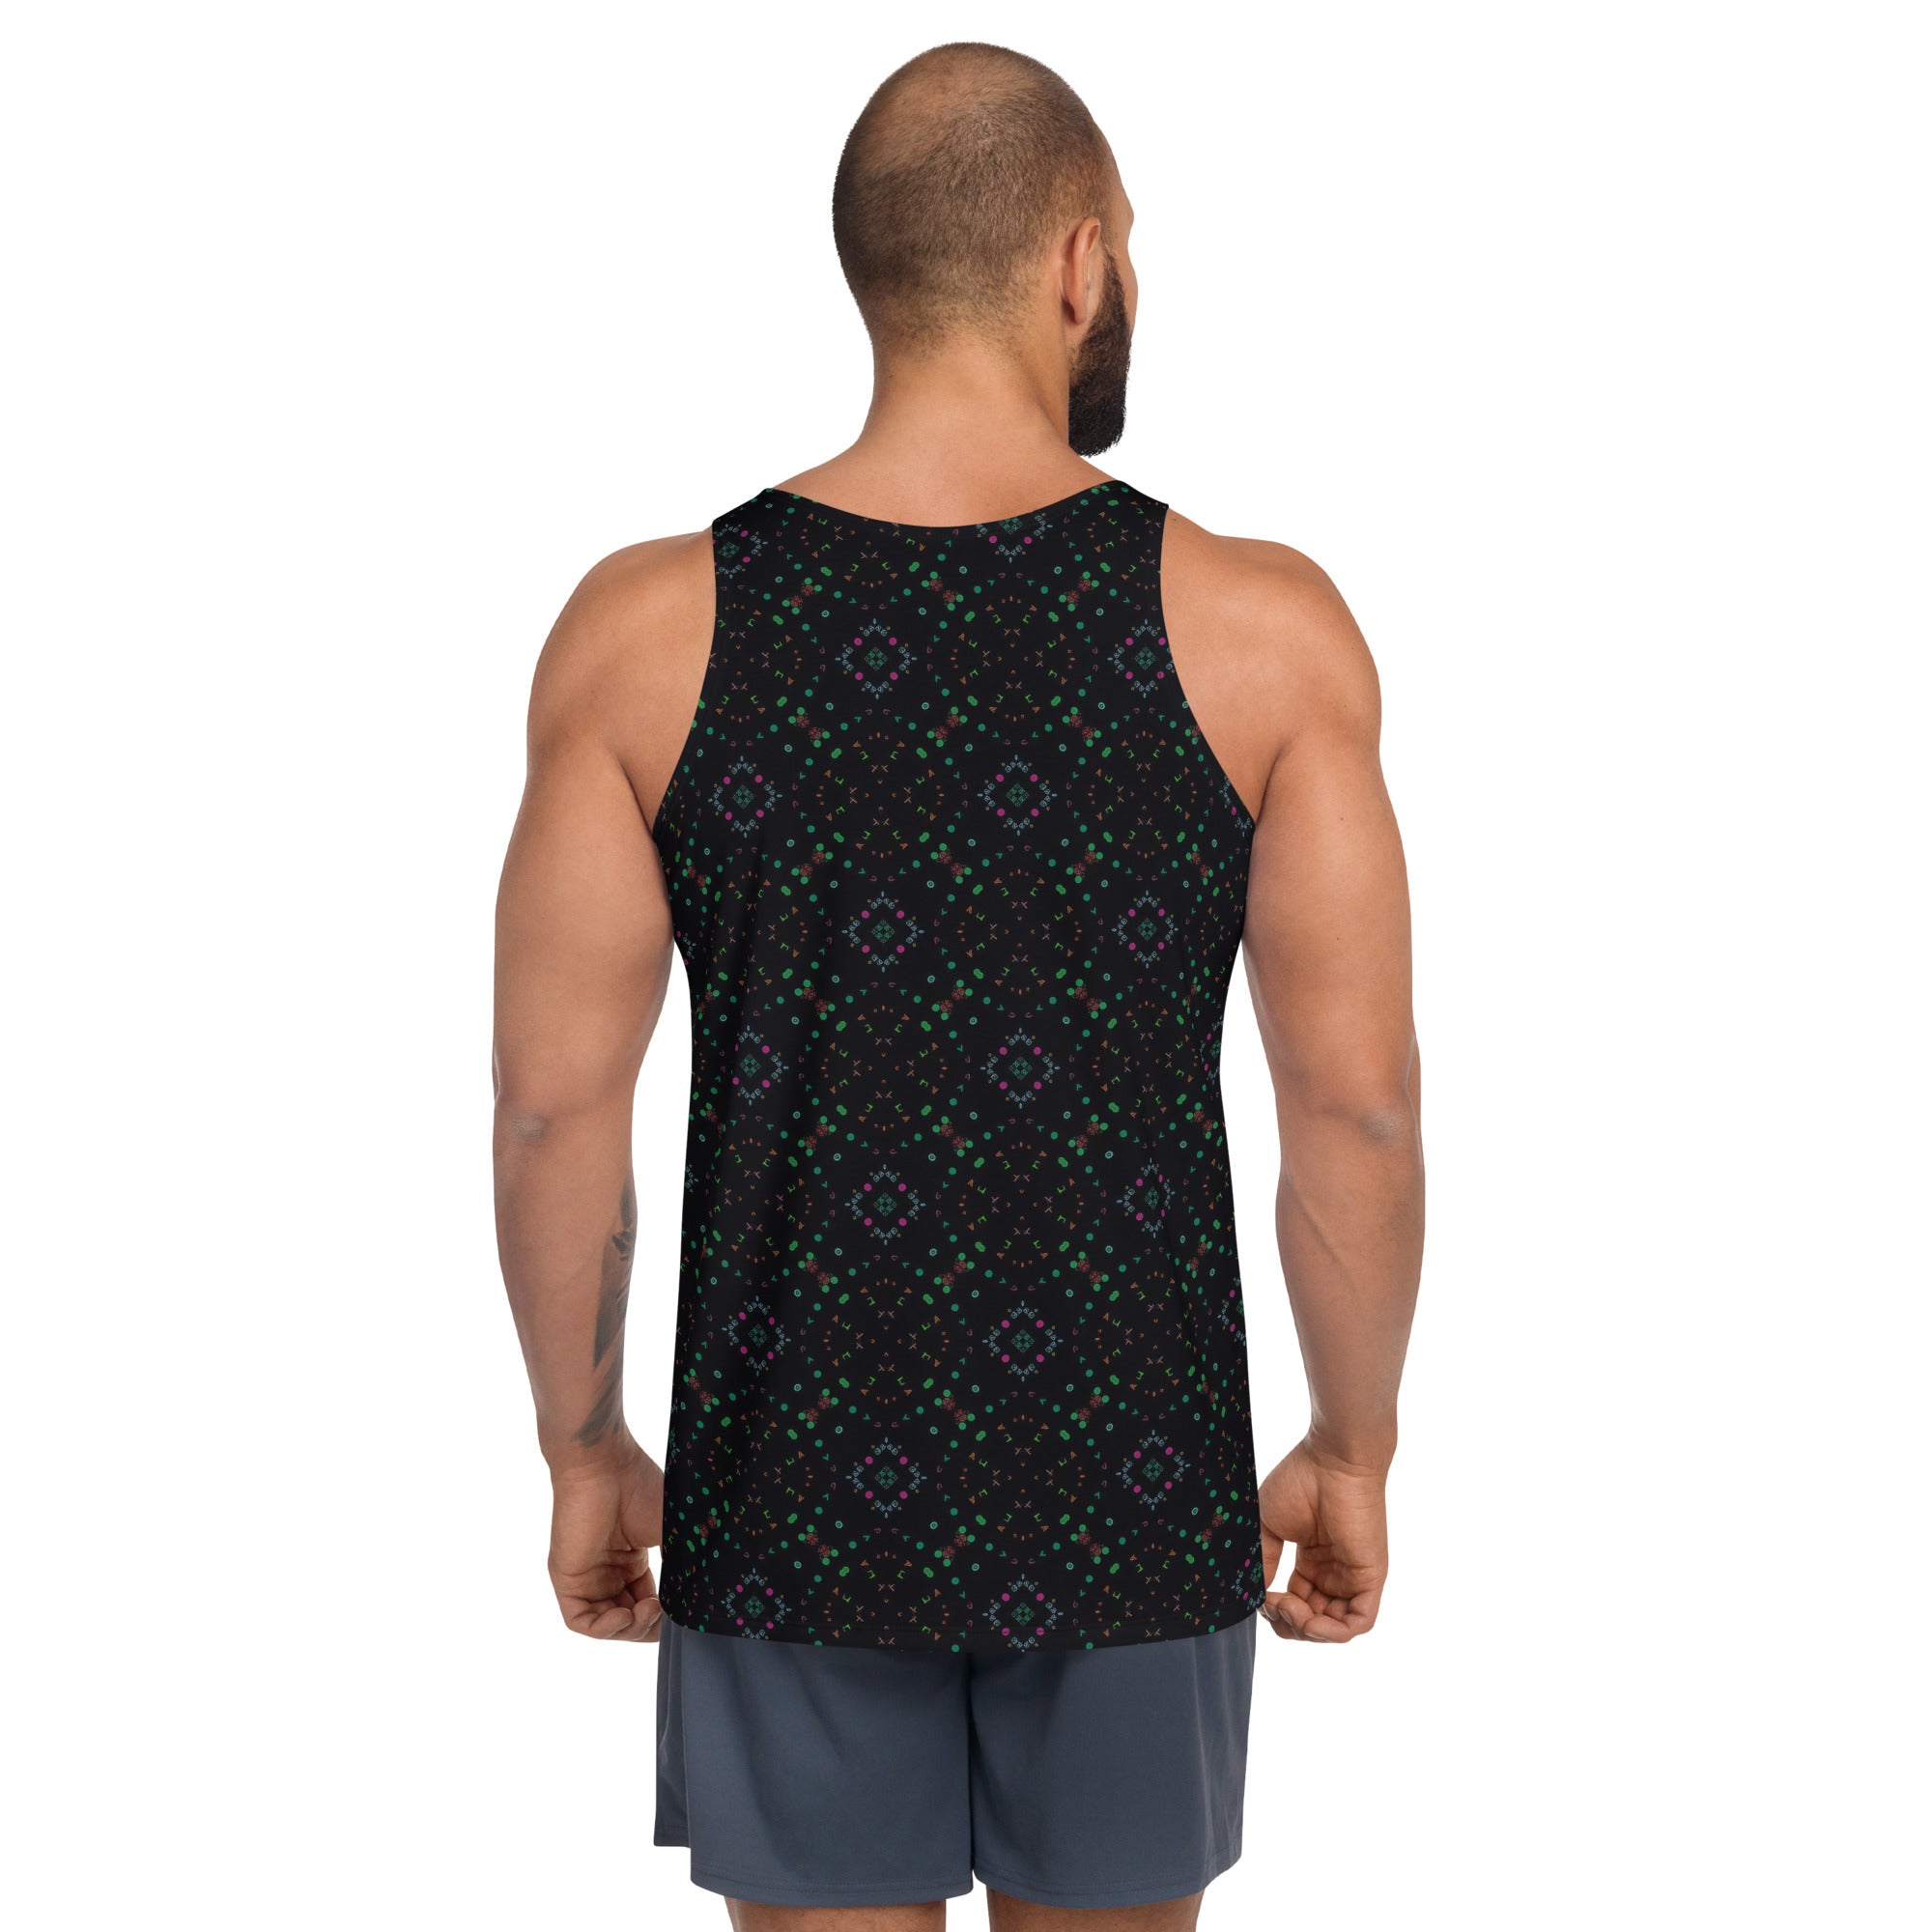 Colorful and bold pop art men's tank top - psychedelic summer fashion.